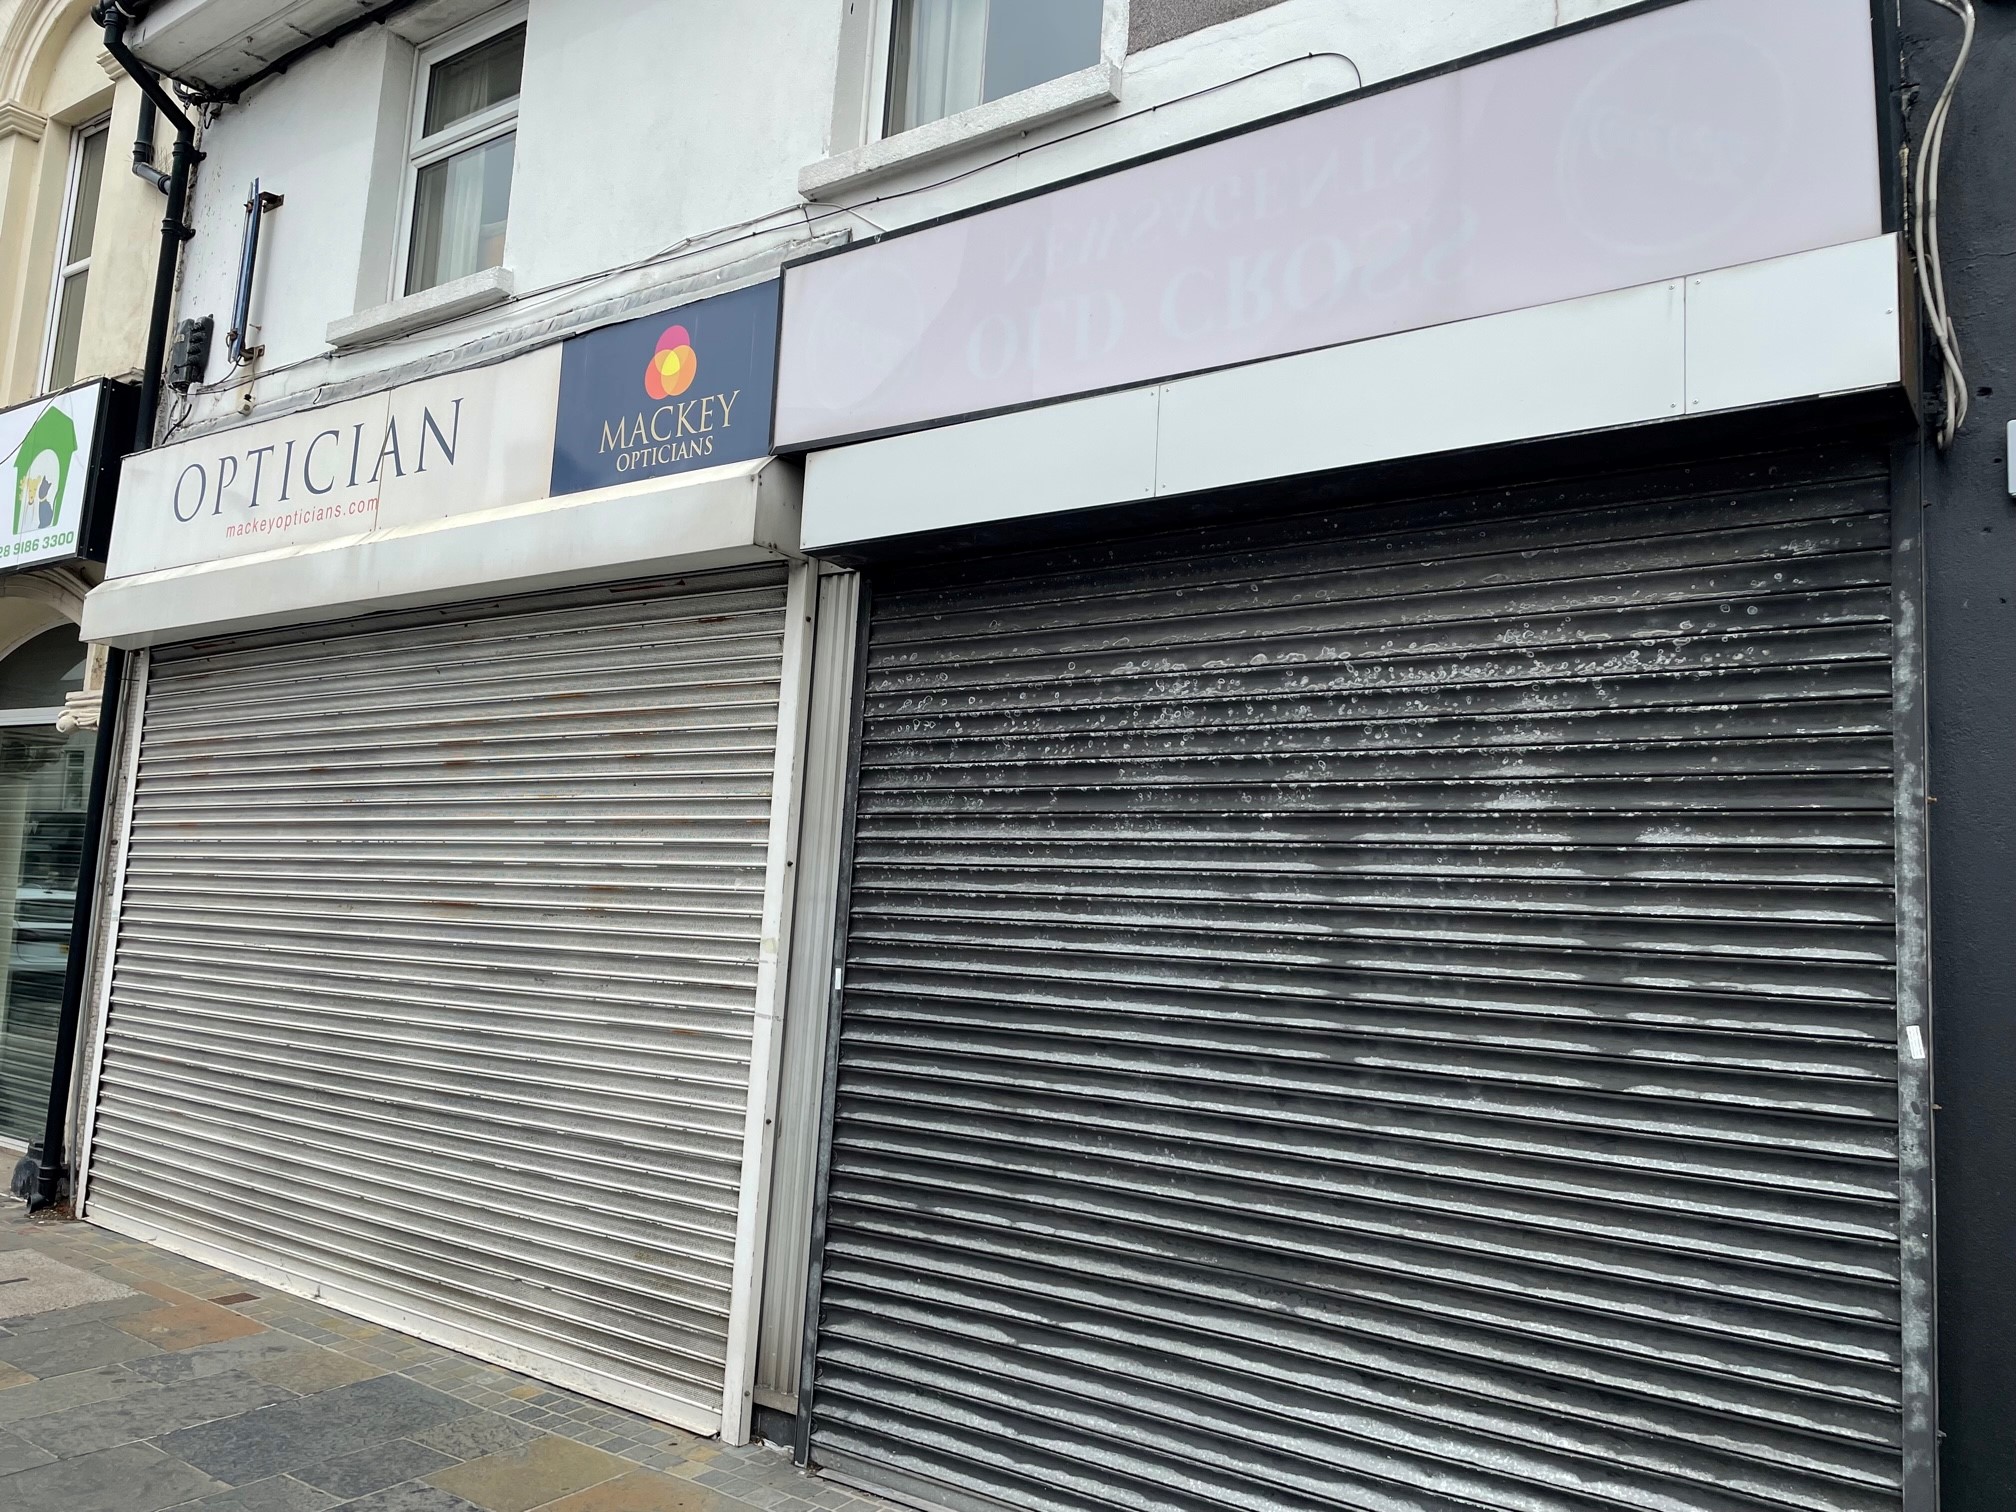 Mackey Opticians, Newtownards to be refurbished/extended